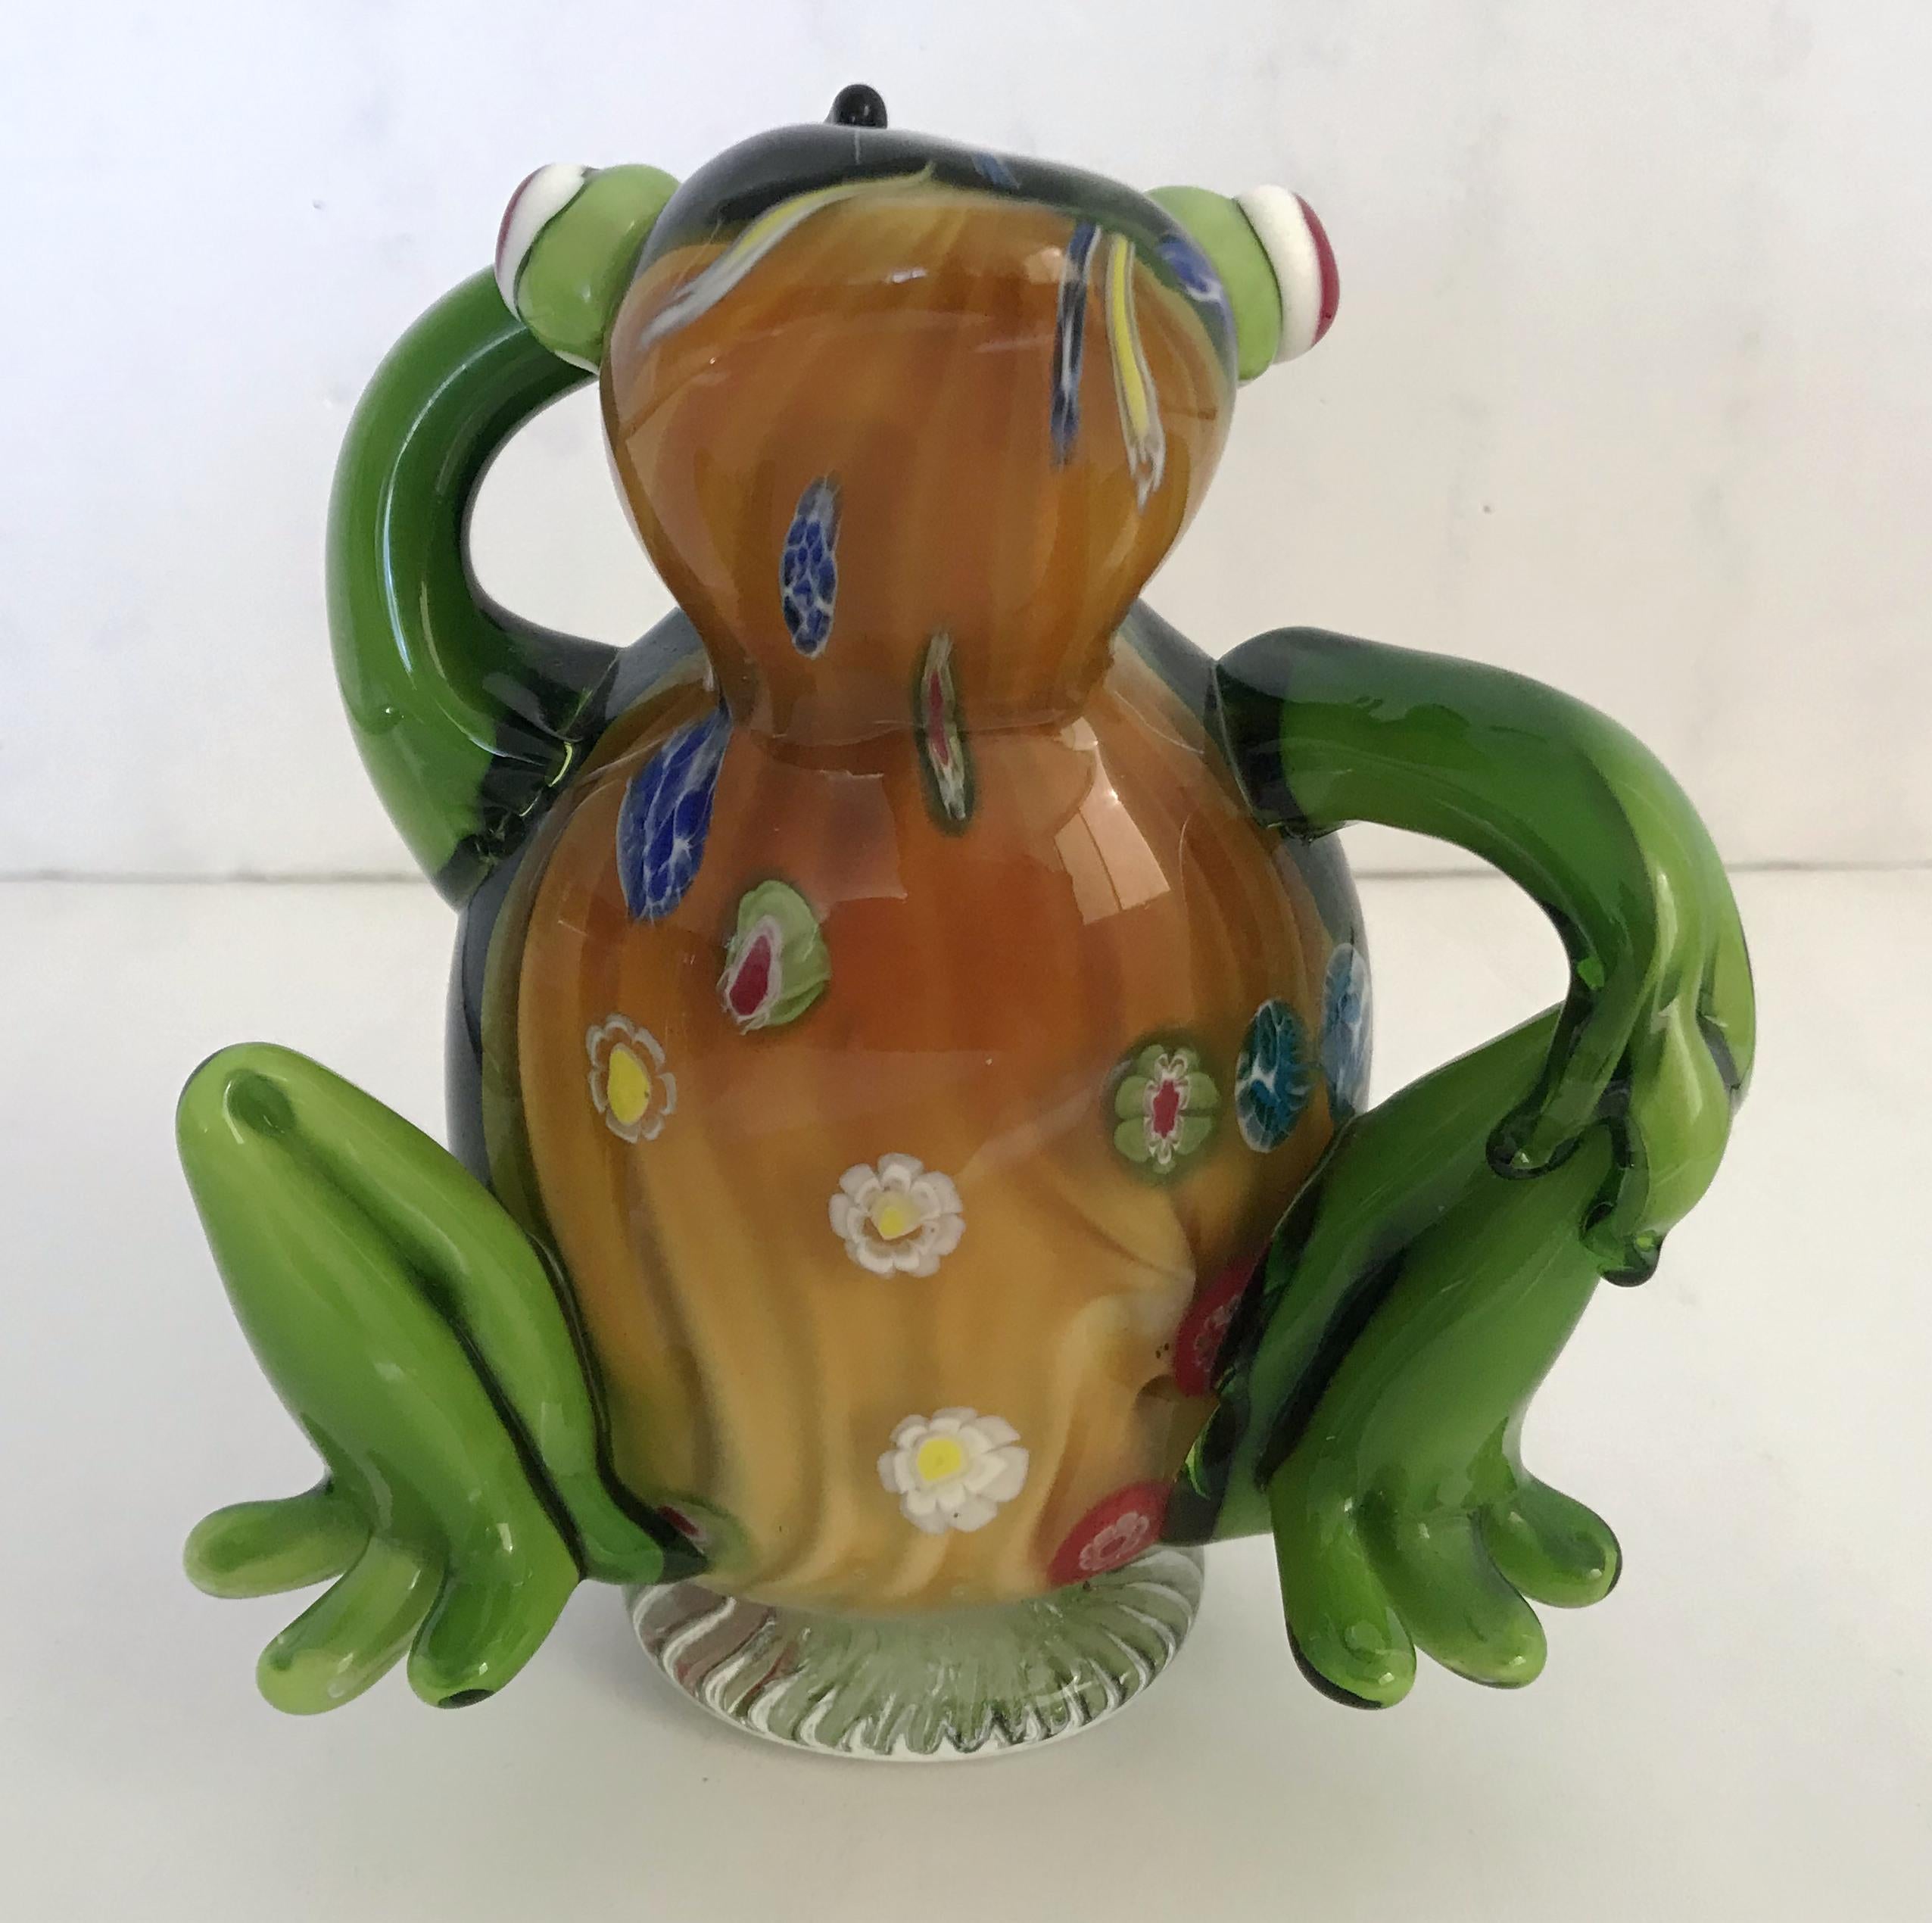 Vintage hand blown Murano glass frog sculpture / Made in Italy, circa 1970s
Measures: Height 6 inches / width 5.5 inches / depth 3 inches
1 in stock in Palm Springs ON 50% OFF SALE for $399 !!
Order Reference #: FABIOLTD G177
This piece makes for